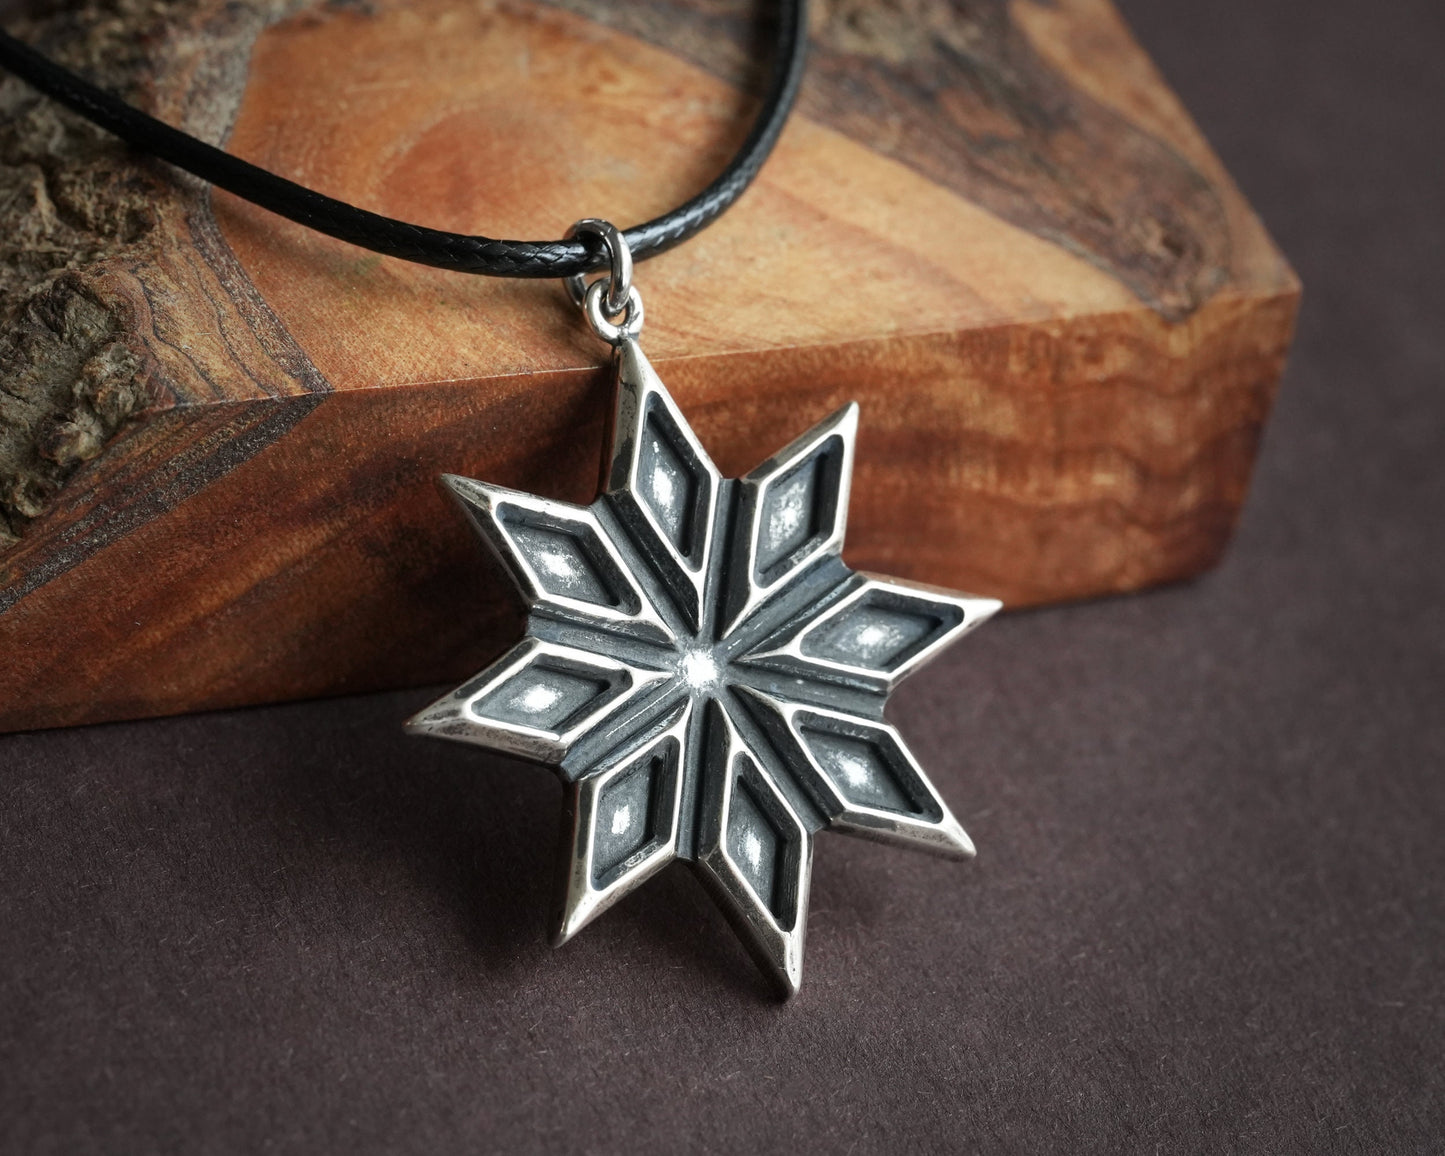 Eight Pointed Star Necklace Octagram Pendant Sterling Silver Solar Sun Northern Star Polygon Jewelry For Men Women With Adjustable String